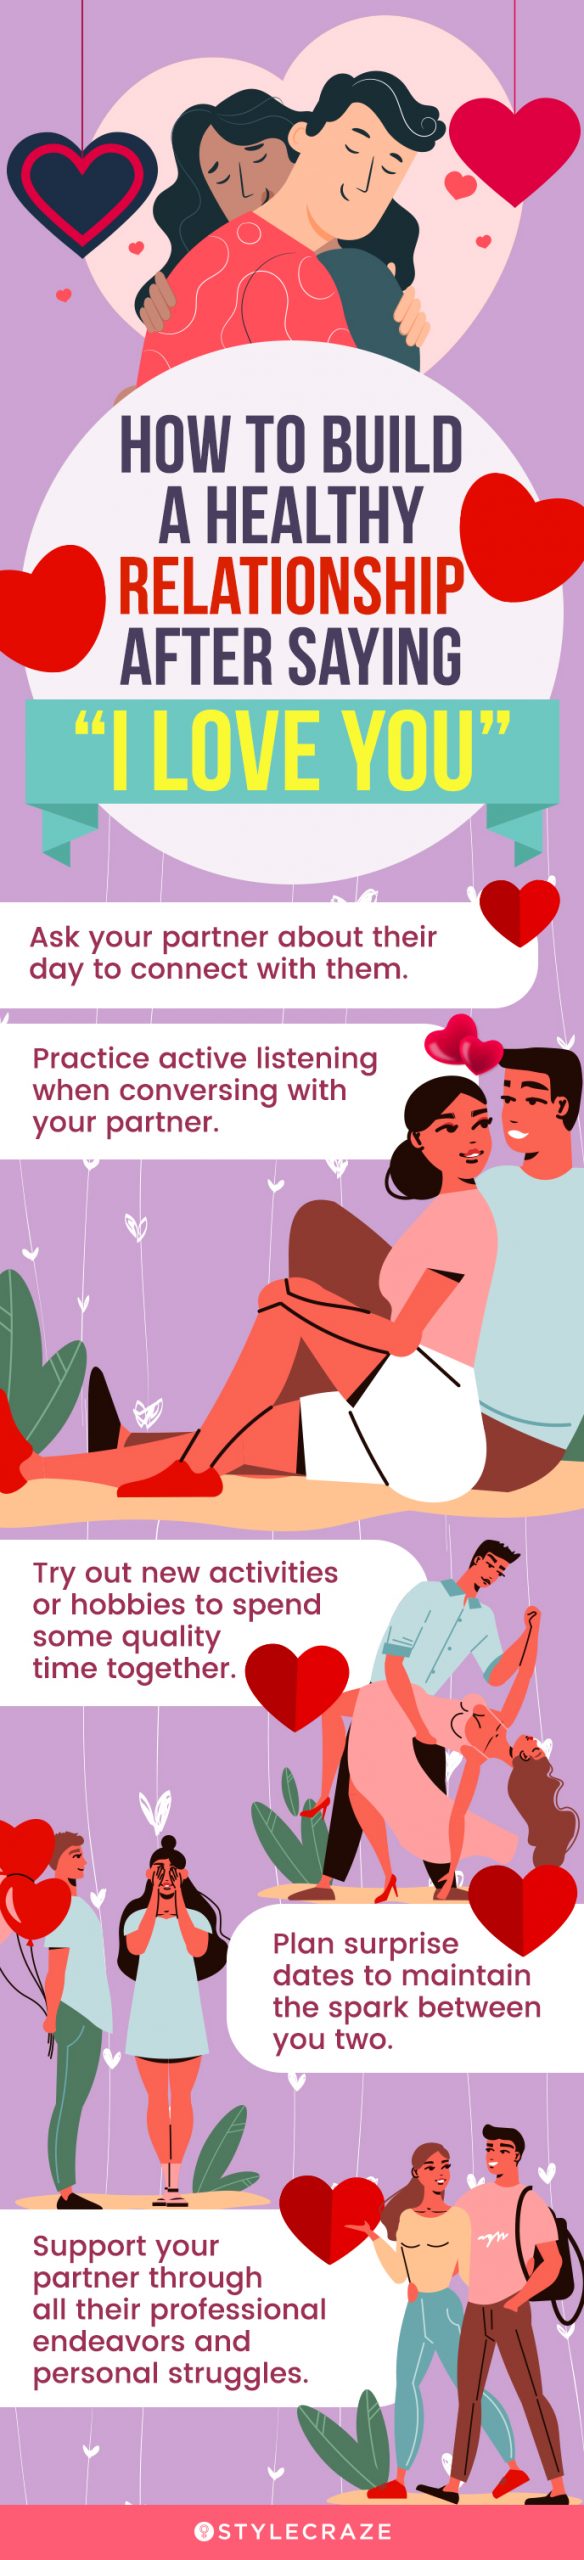 how to build a healthy relationship after saying “i love you” (infographic)